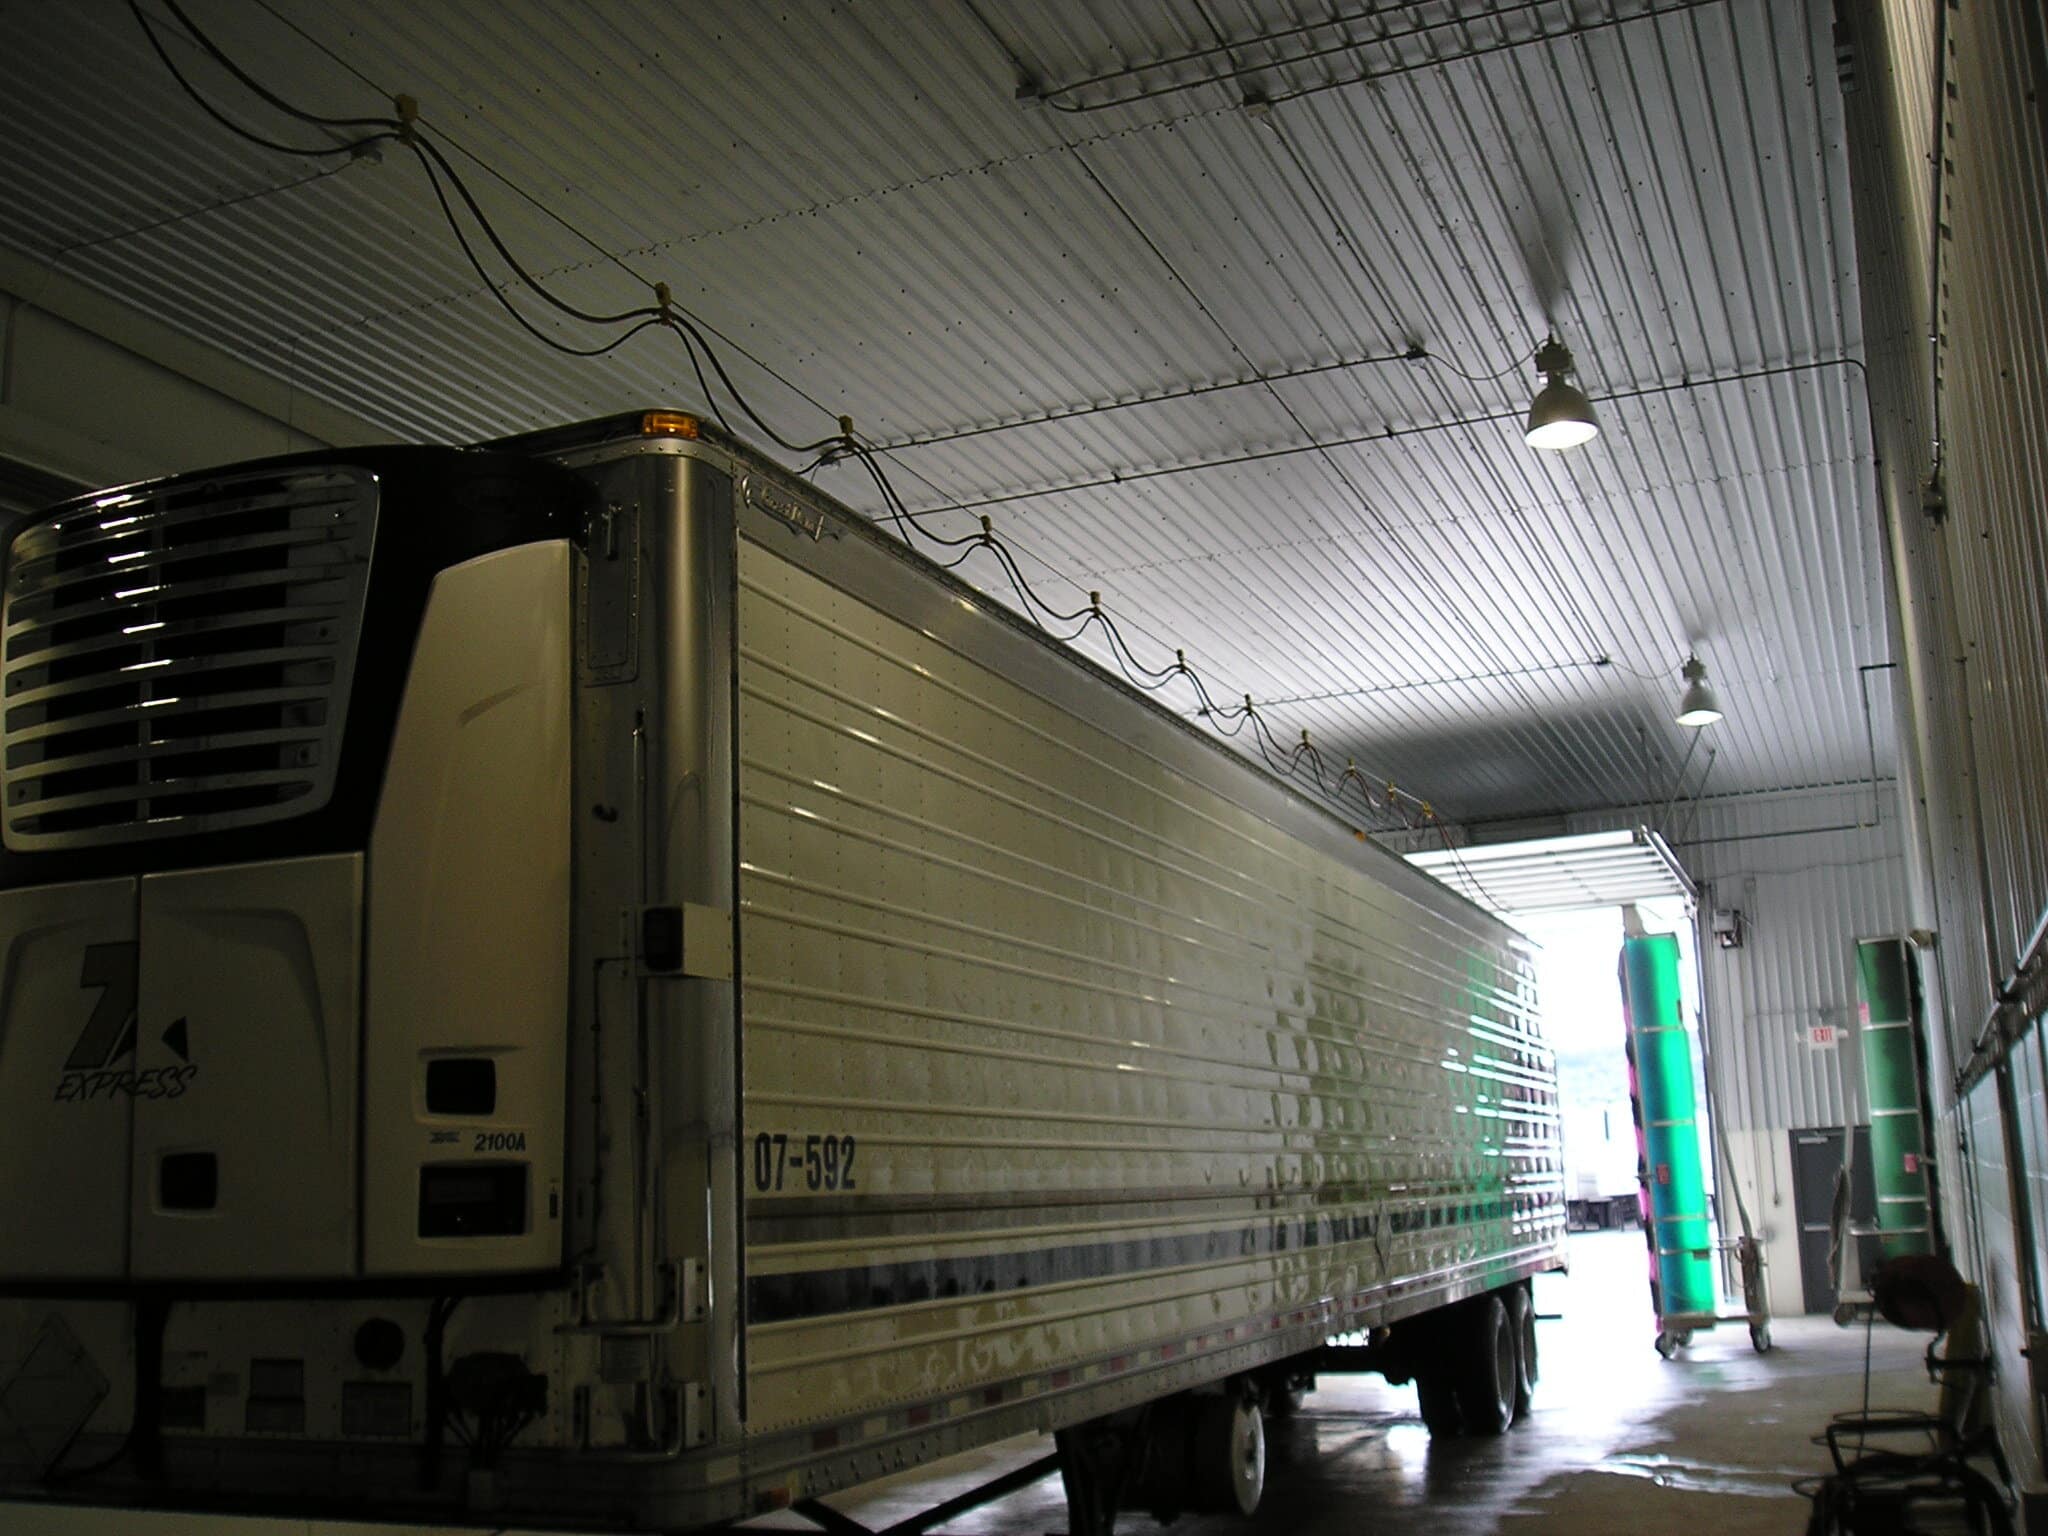 A semi-truck parked inside a spacious industrial warehouse with overhead lighting and visible electrical conduits.